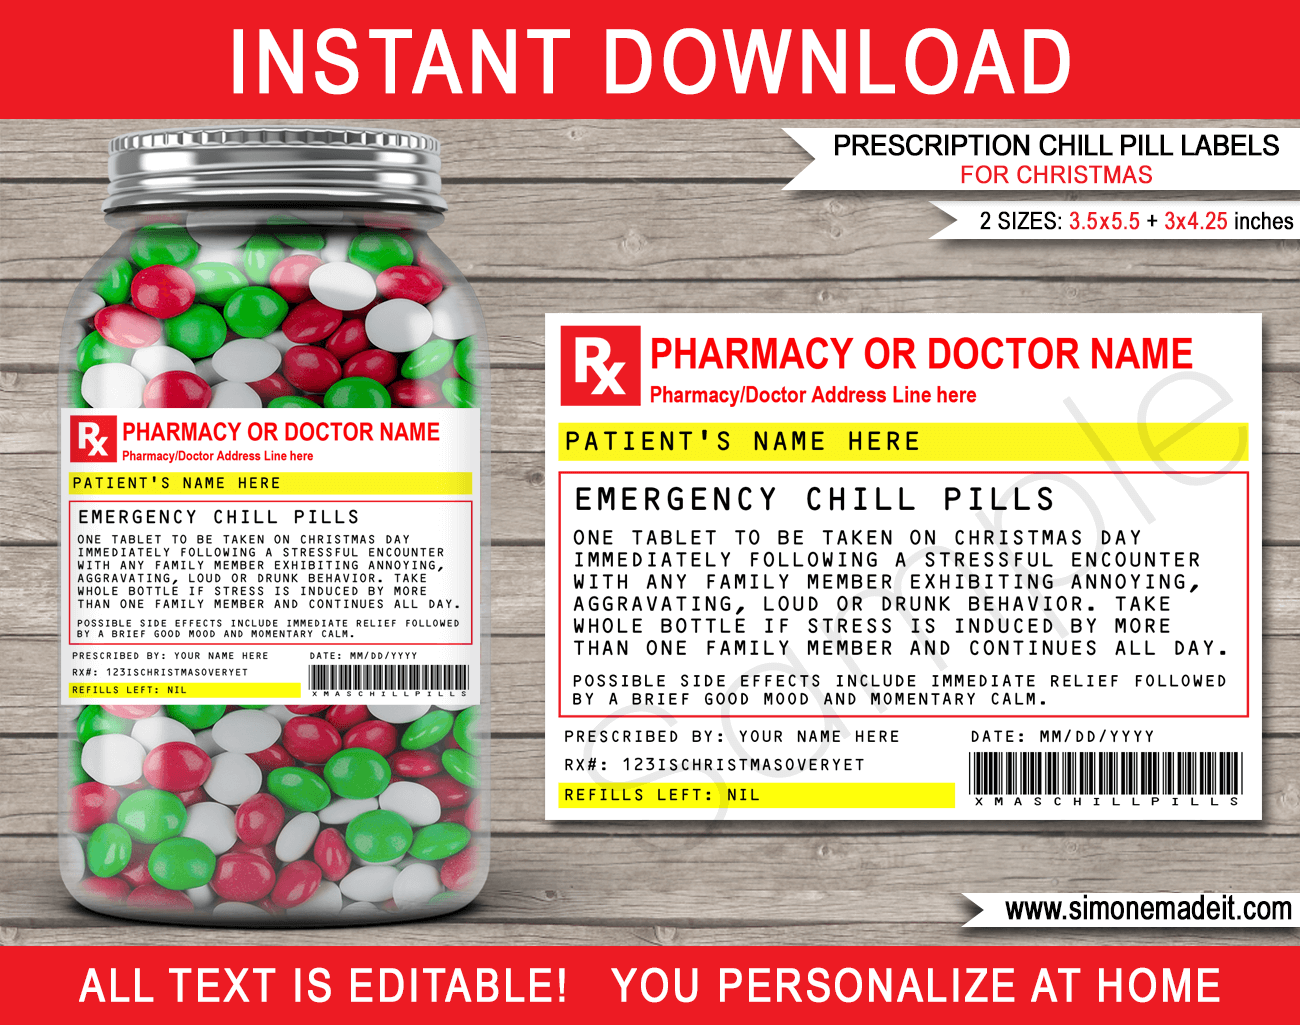 Prescription Chill Pills for Christmas Gift Label Template | Emergency Chill Pills